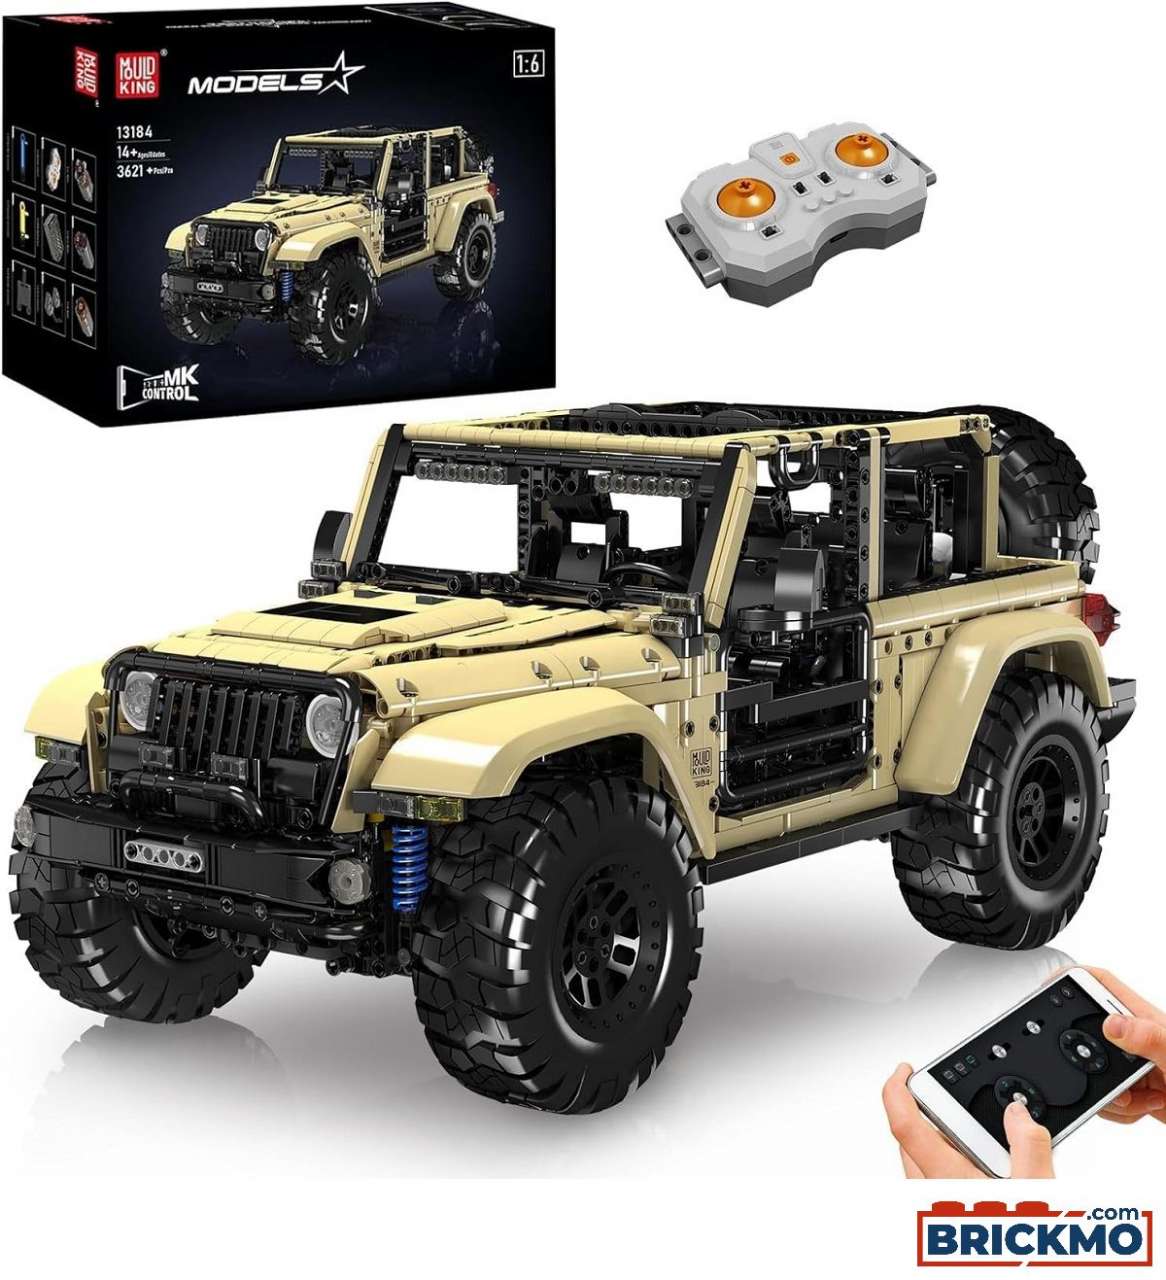 Mould King Remote Control Off-Road Wrangler 13184